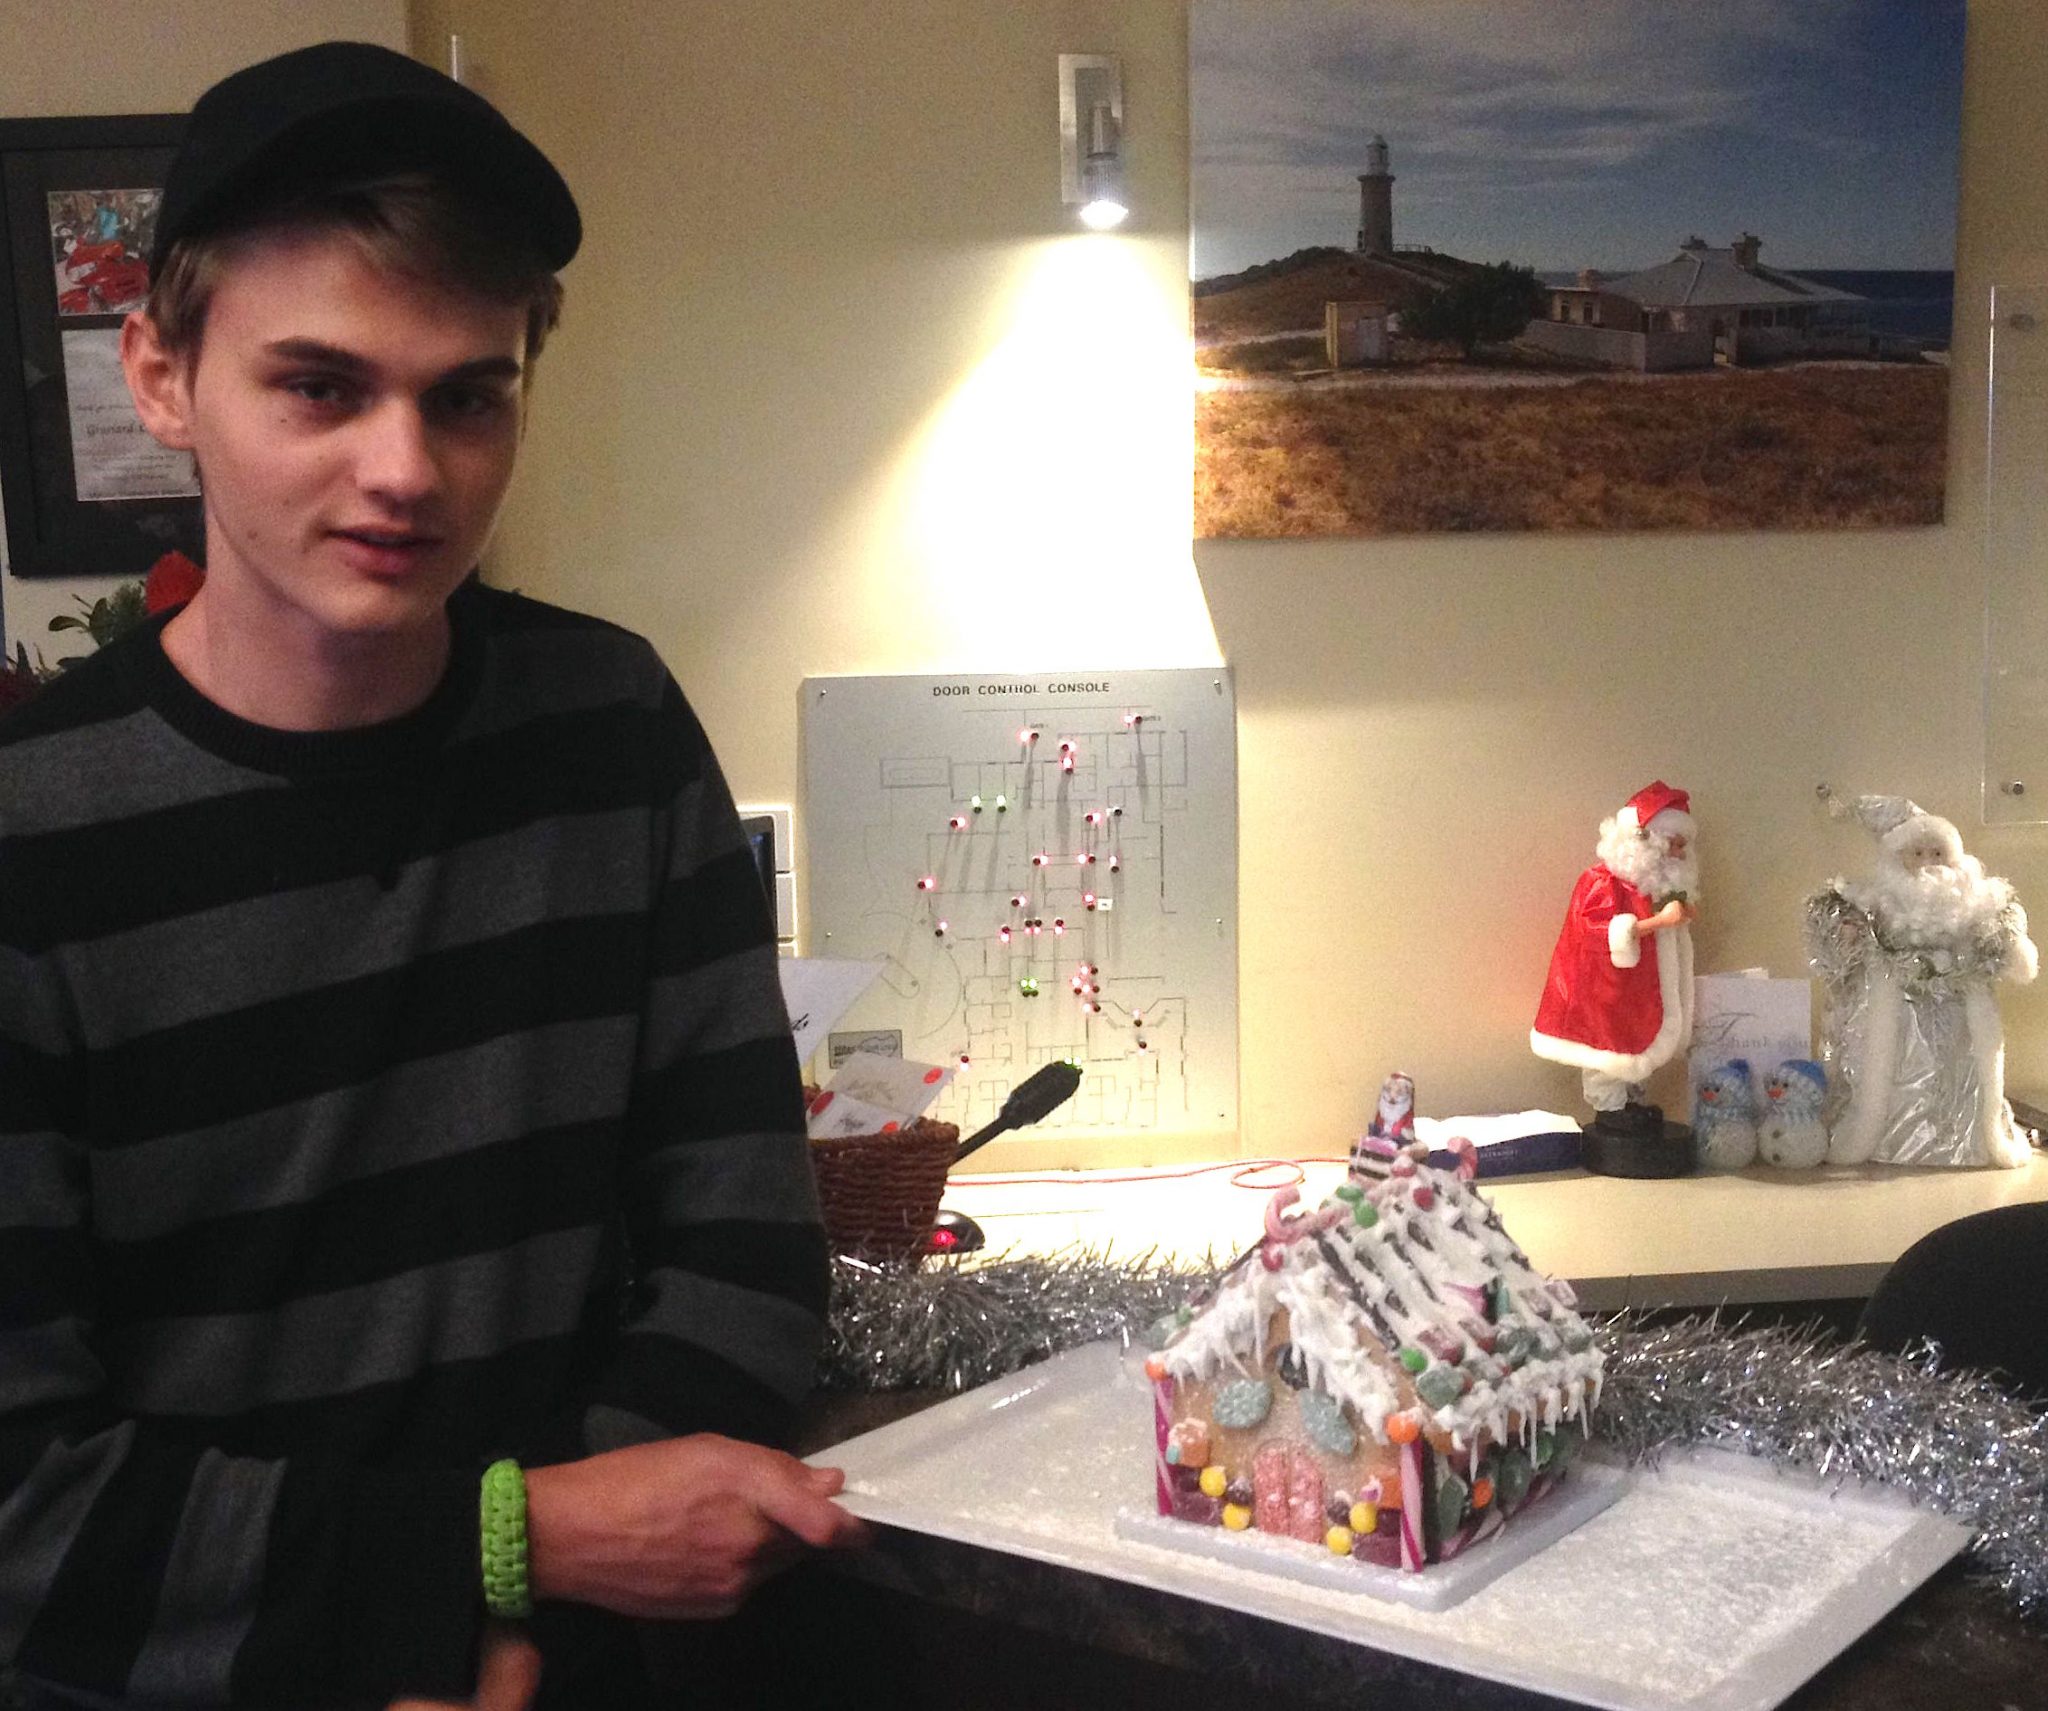 133.1. Josh and the gingerbread house he kindly made to give to residents of the elder care center on Phillip Island, Australia